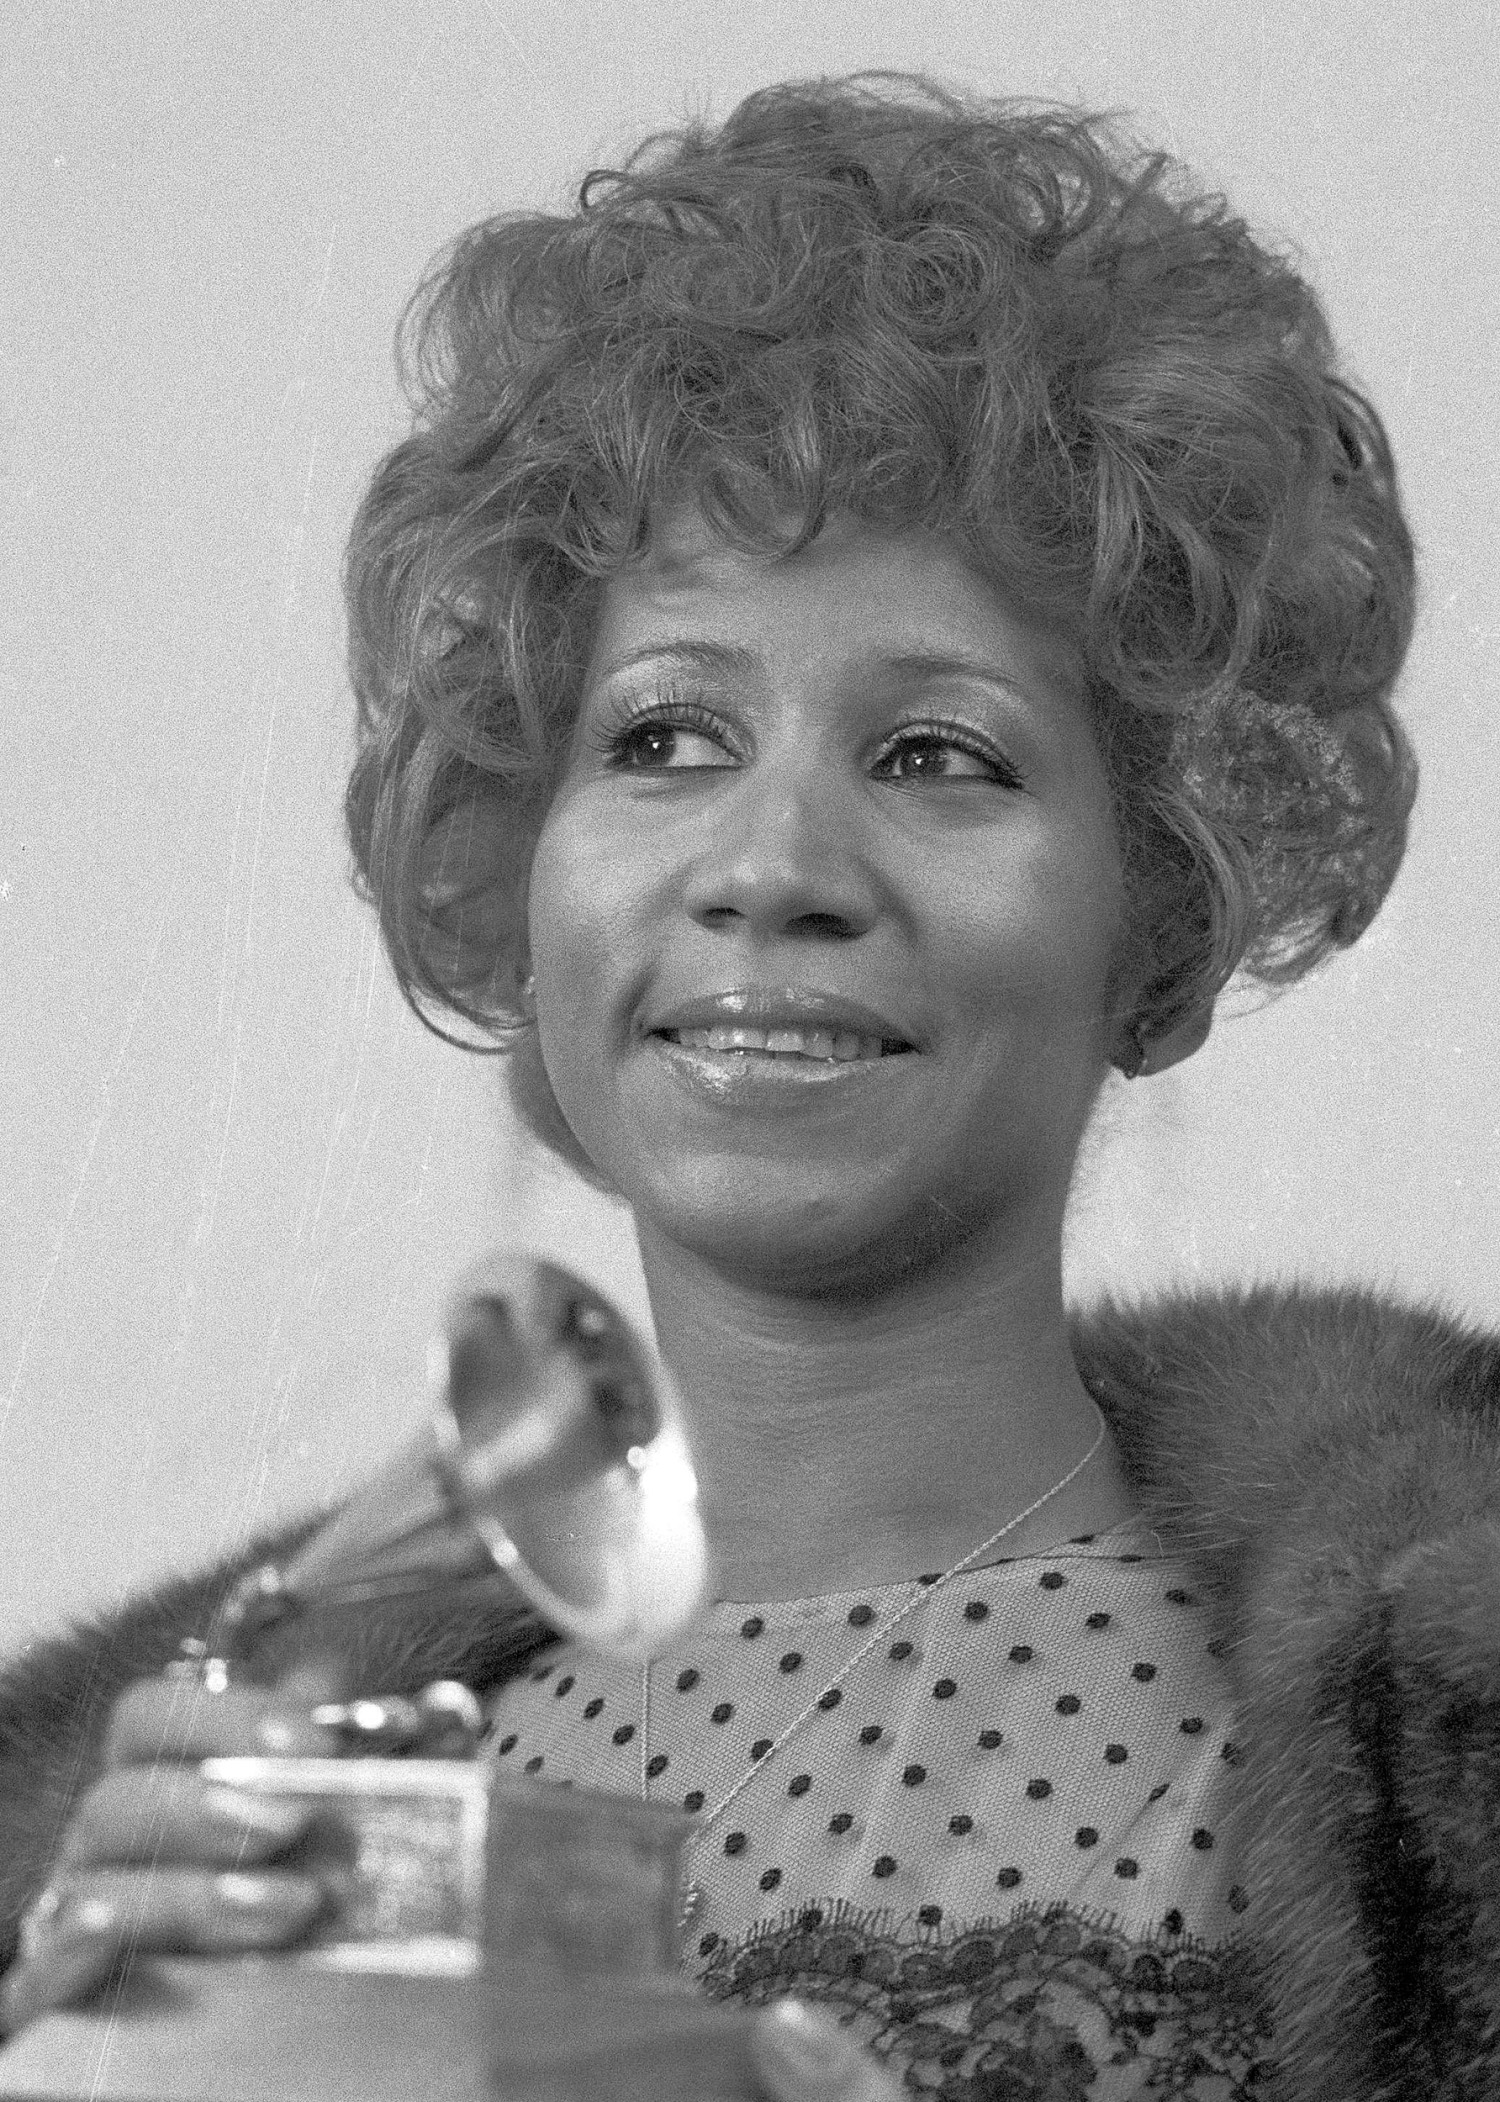 This is the moment Aretha Franklin became the 'Queen of Soul